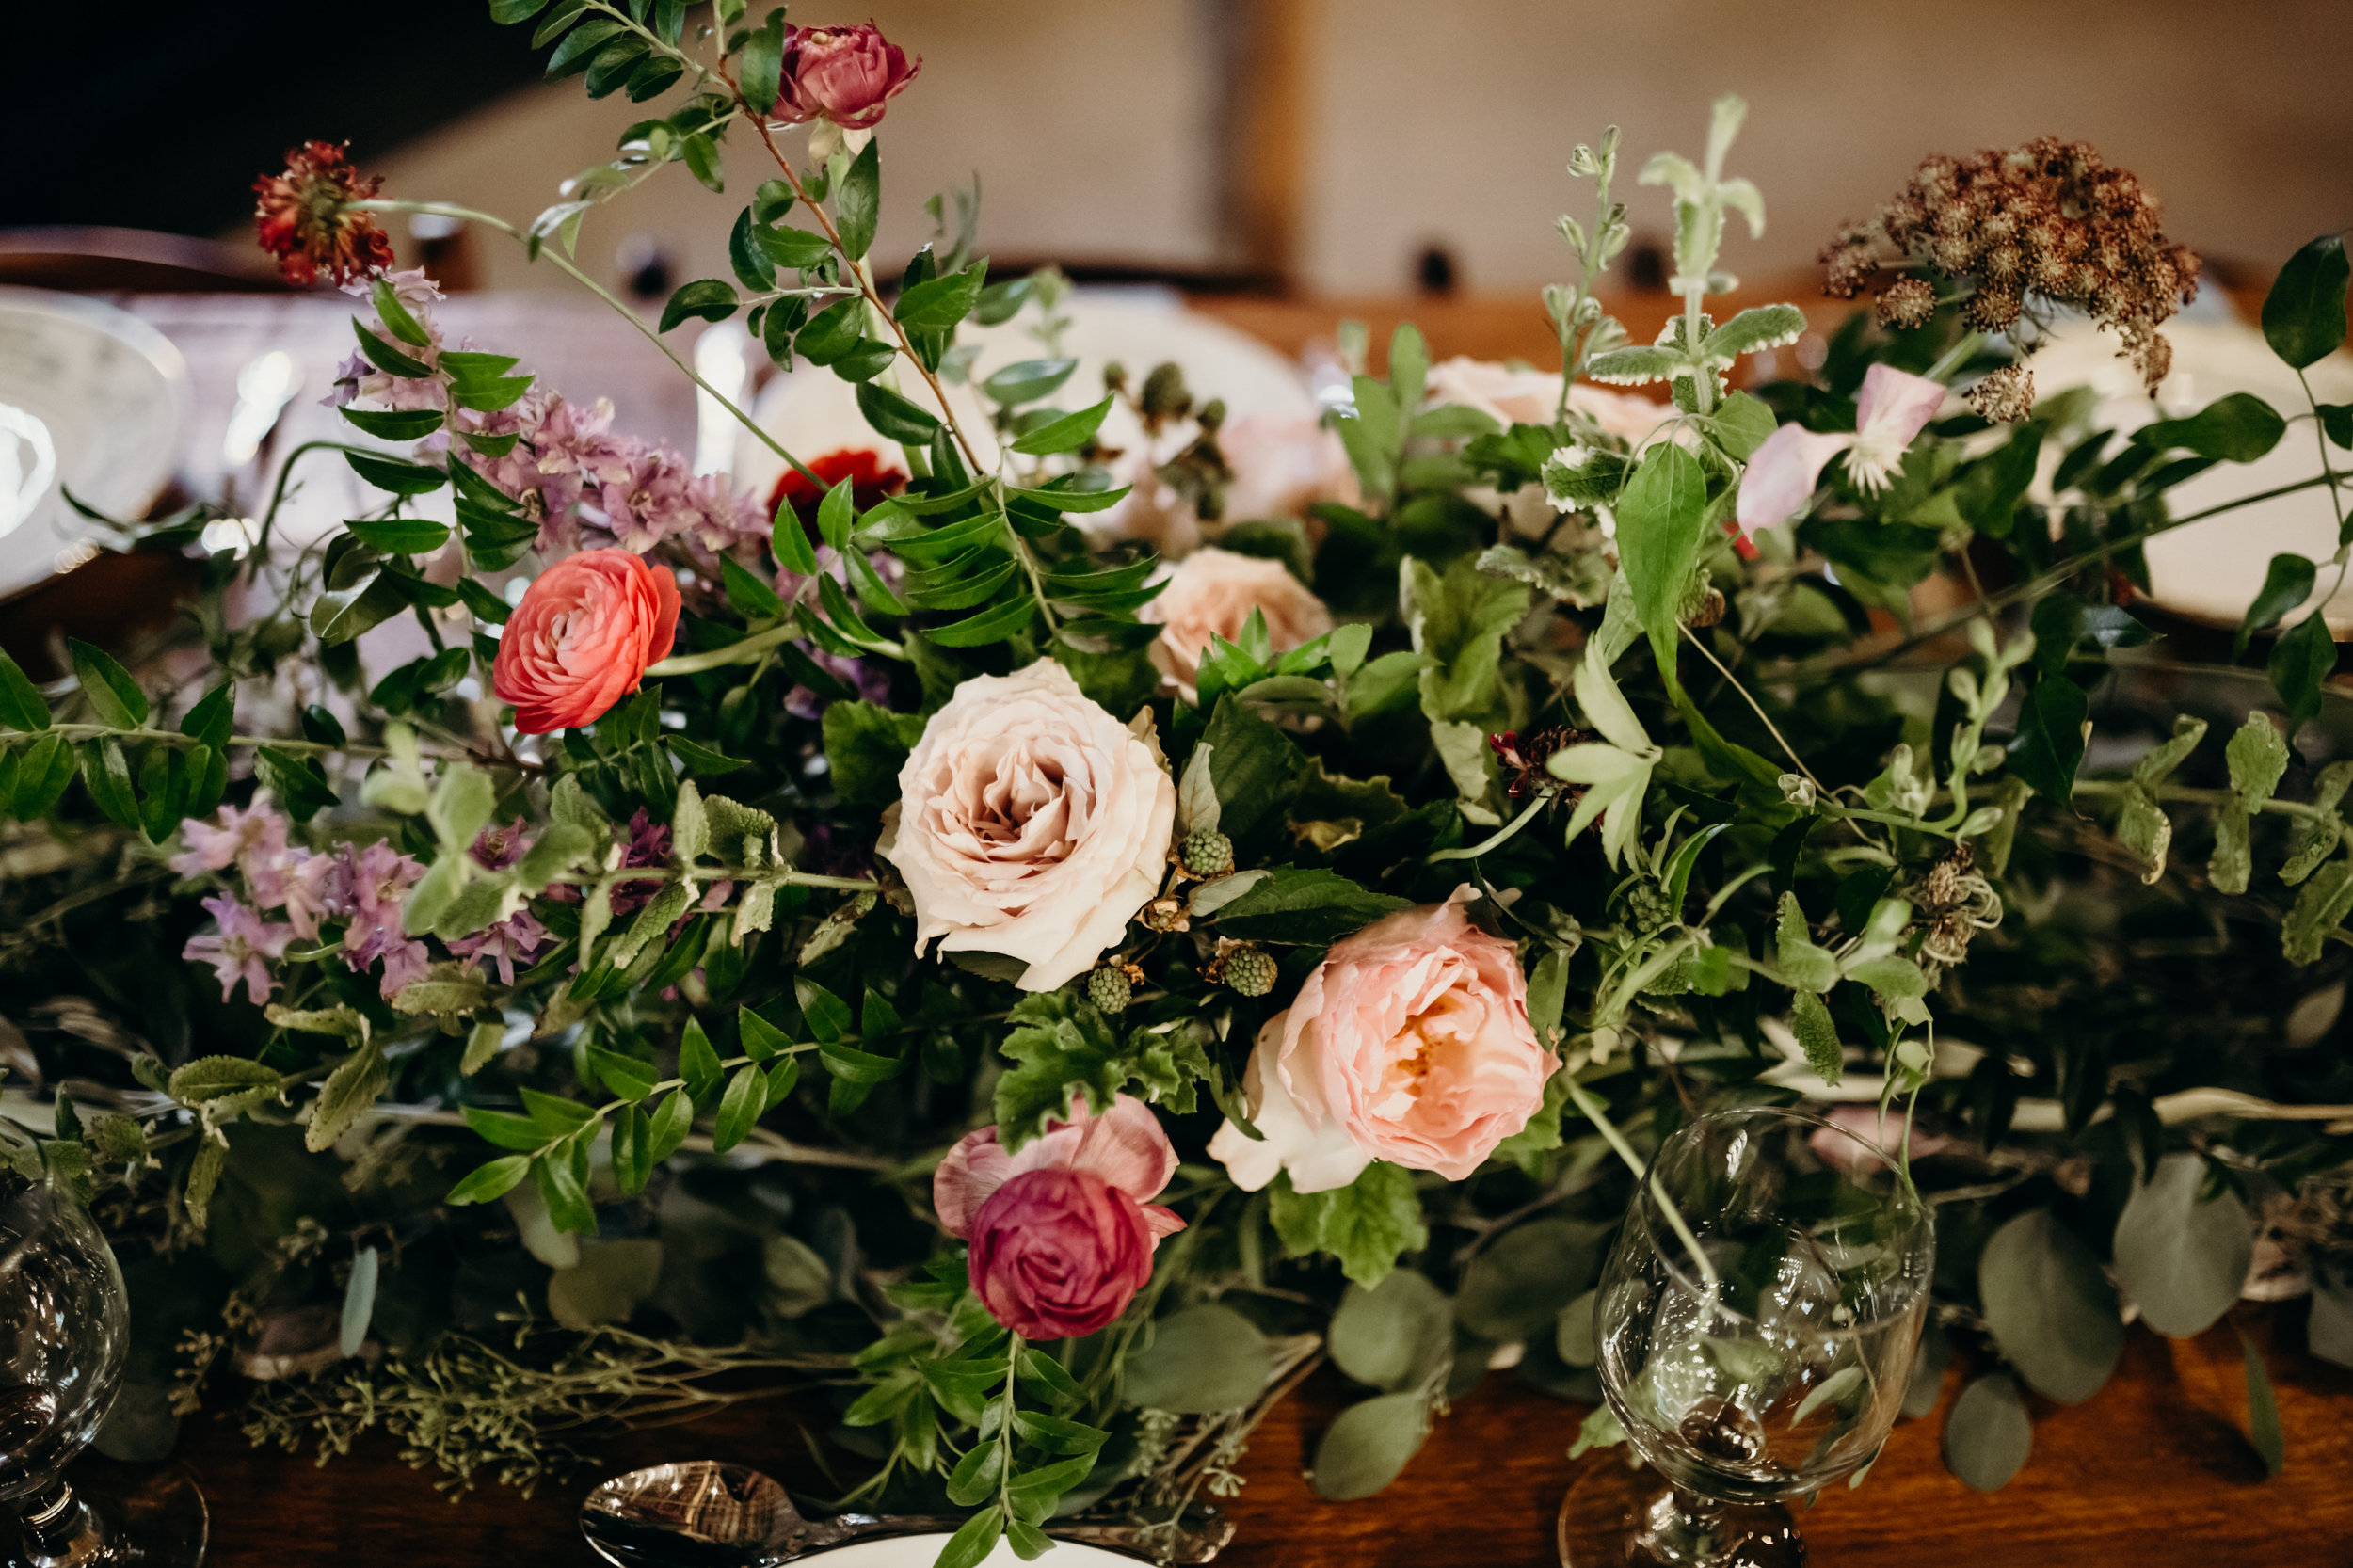 Natural floral arrangement with garden roses, ranunculus, and chocolate laceflower // Meadow Hill Farm Wedding